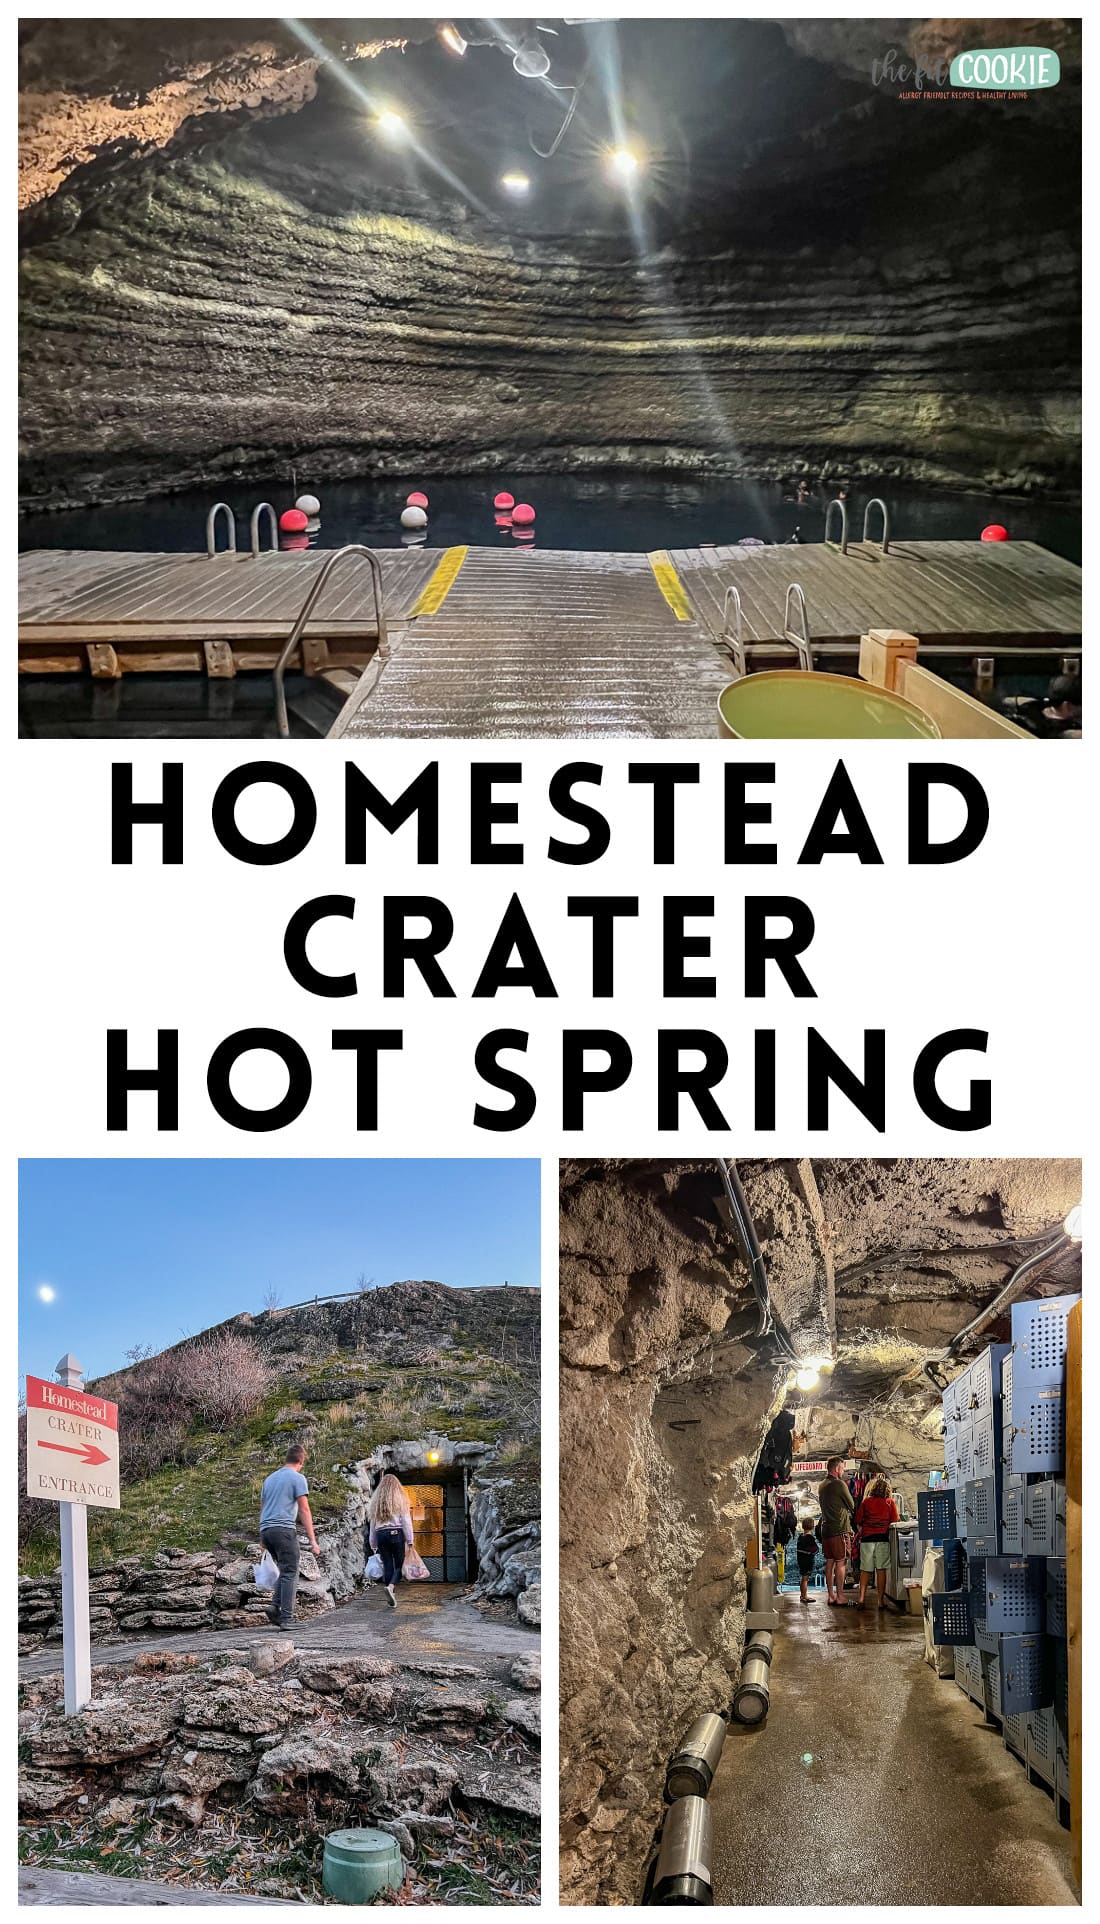 photo collage of homestead crater hot spring in utah